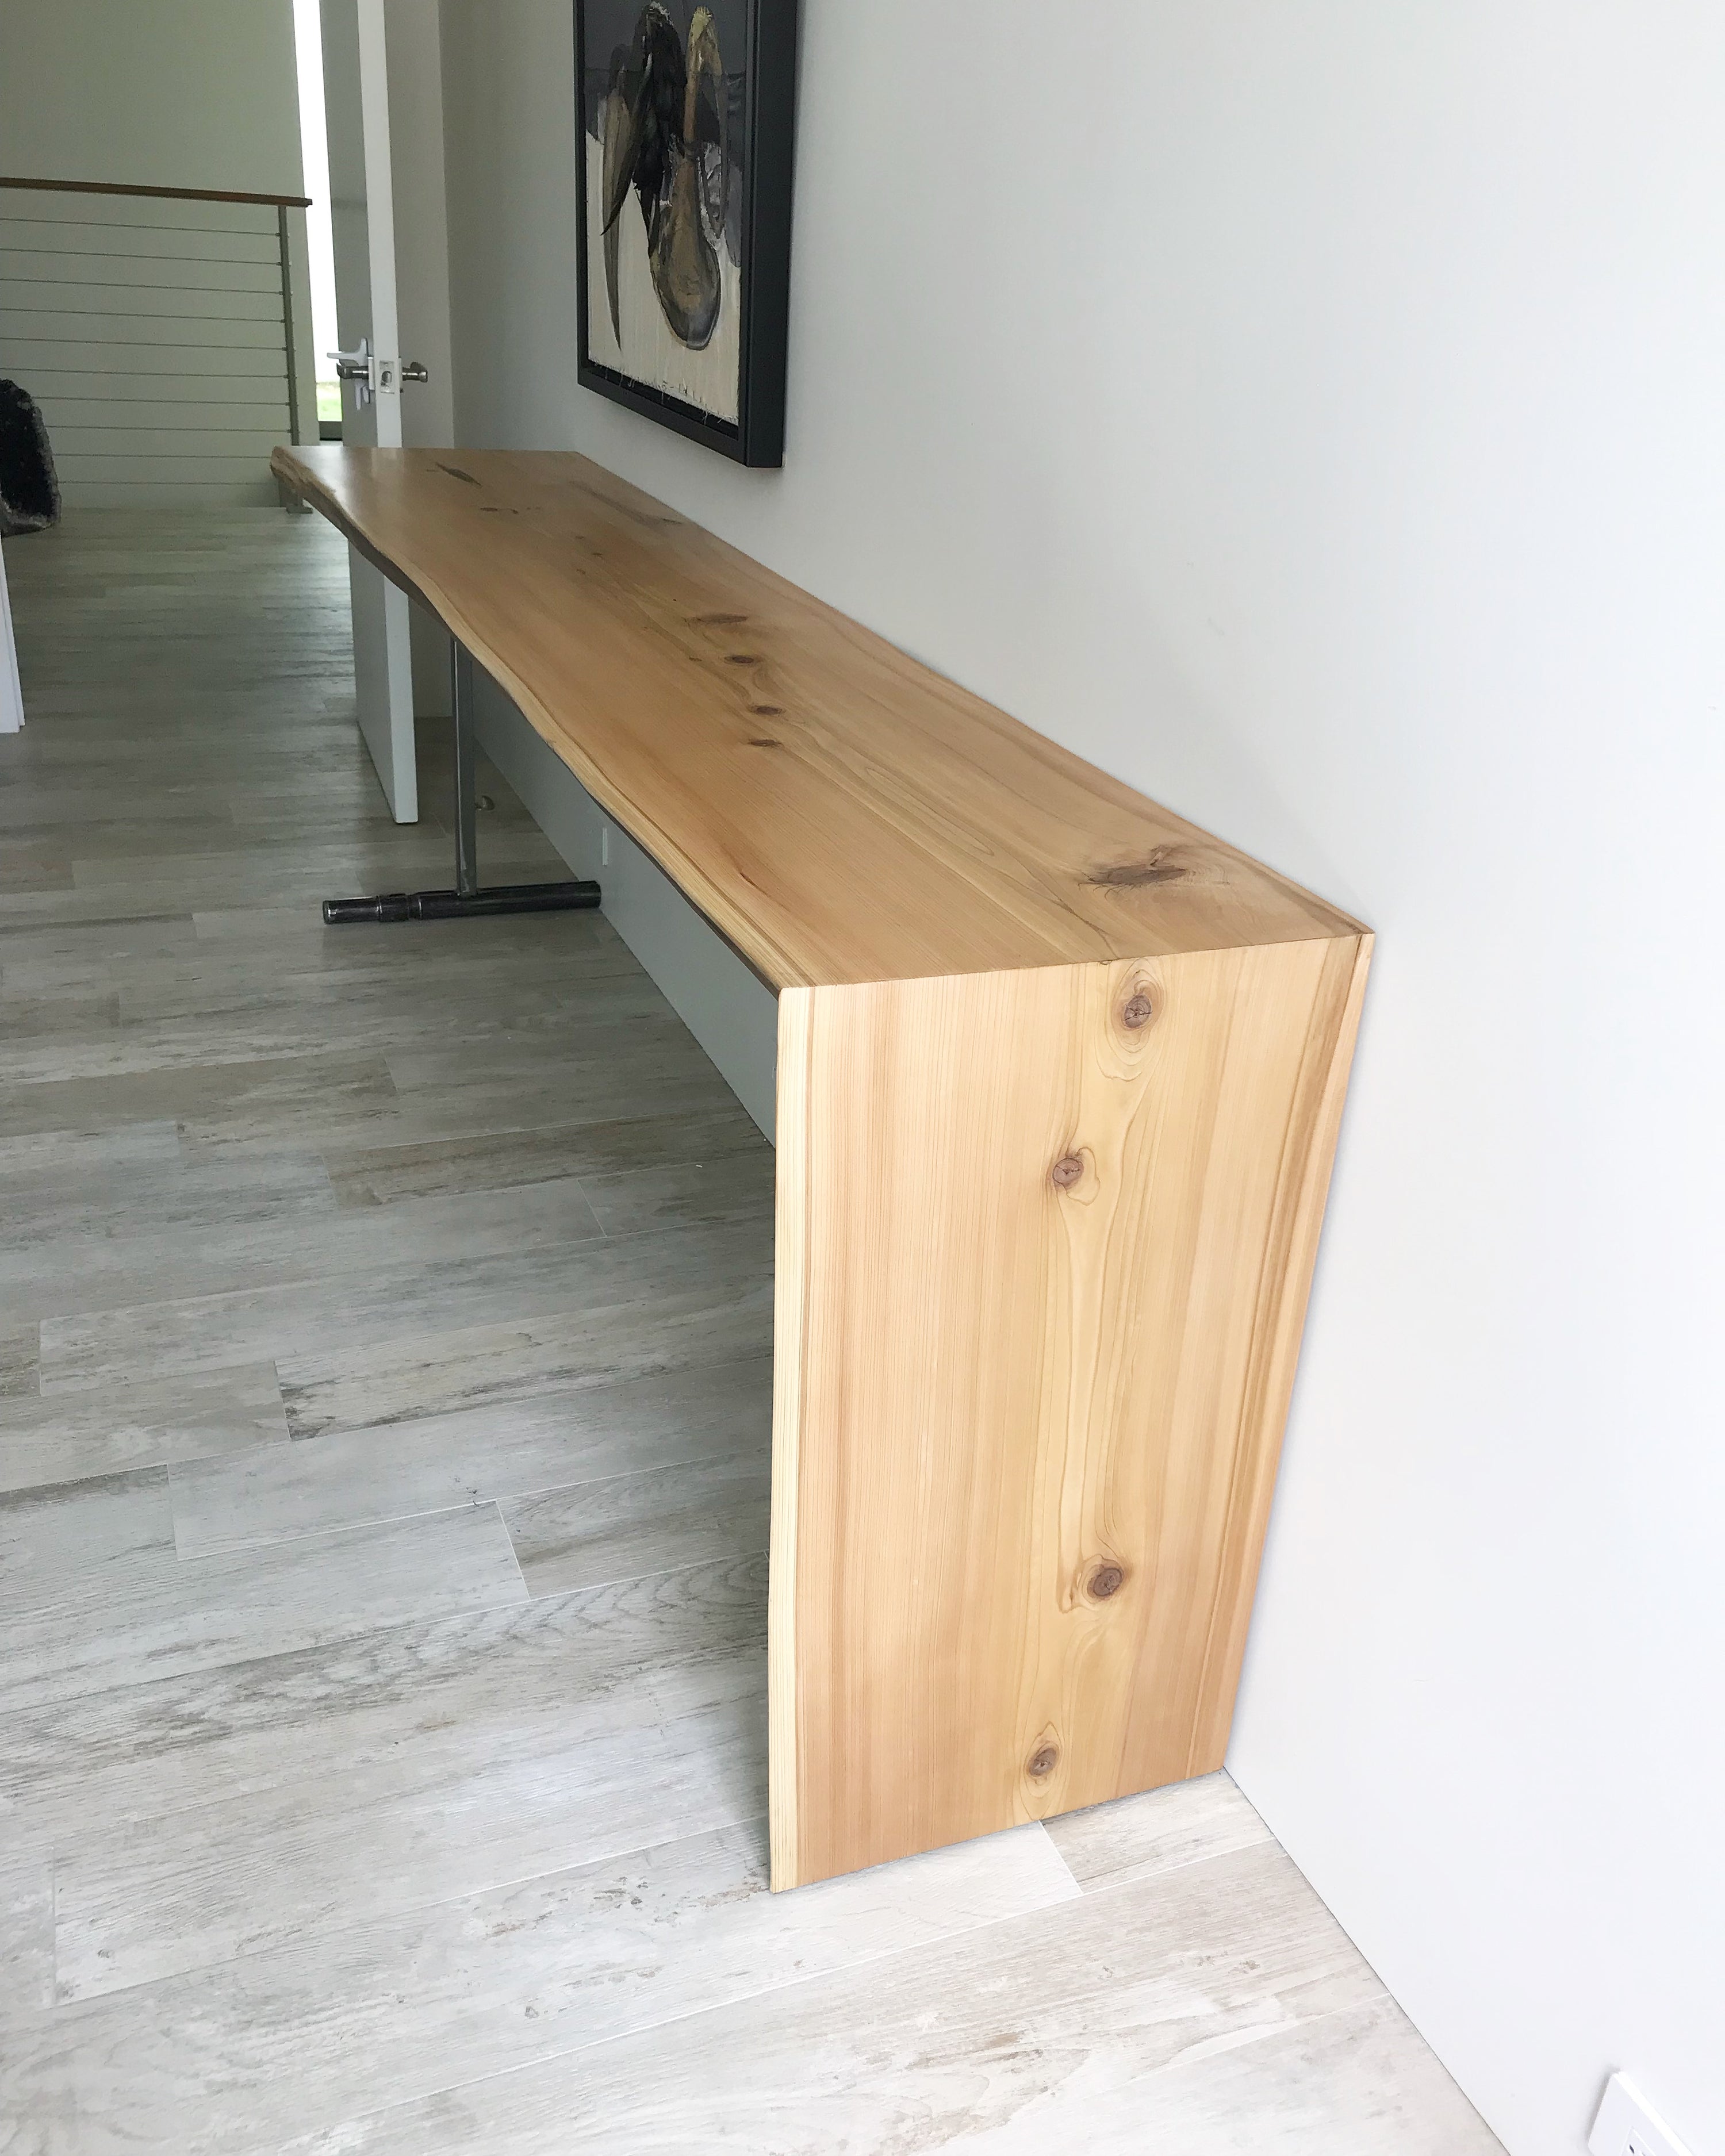 Decorate your home with our custom made desks